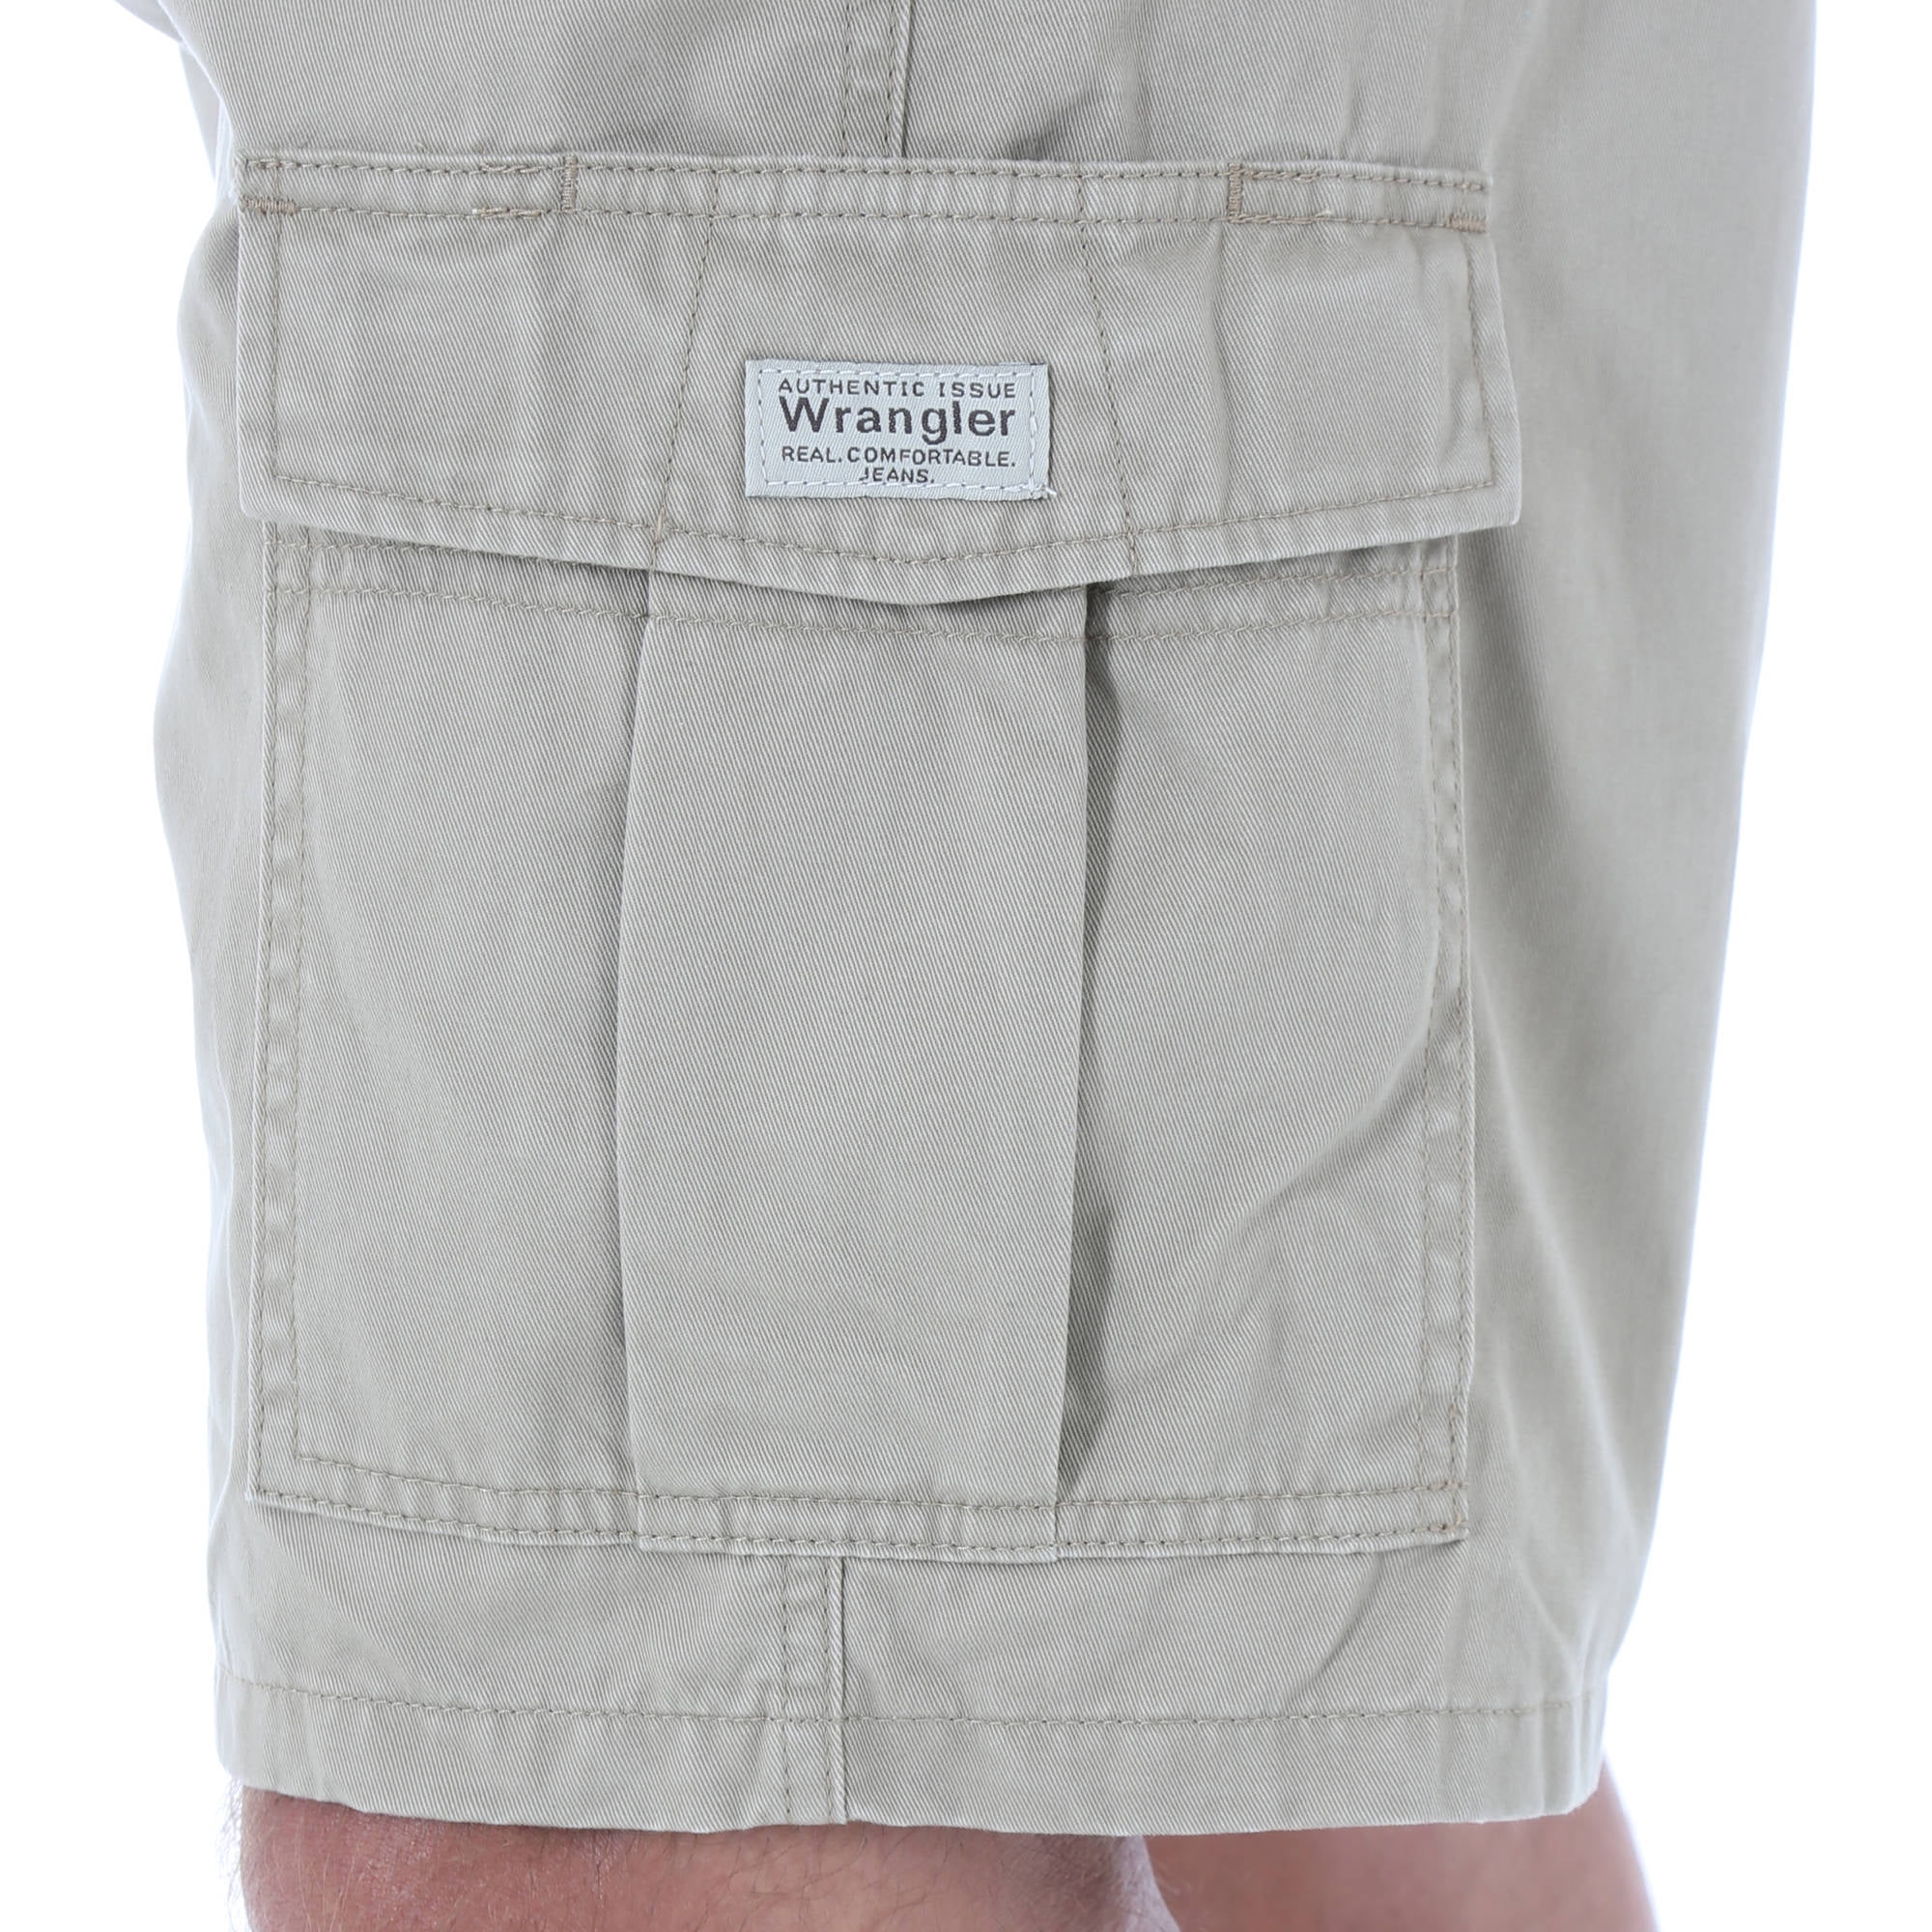 Authentic Issue Wrangler Real Comfortable Shorts Offers Sale, Save 42% |  